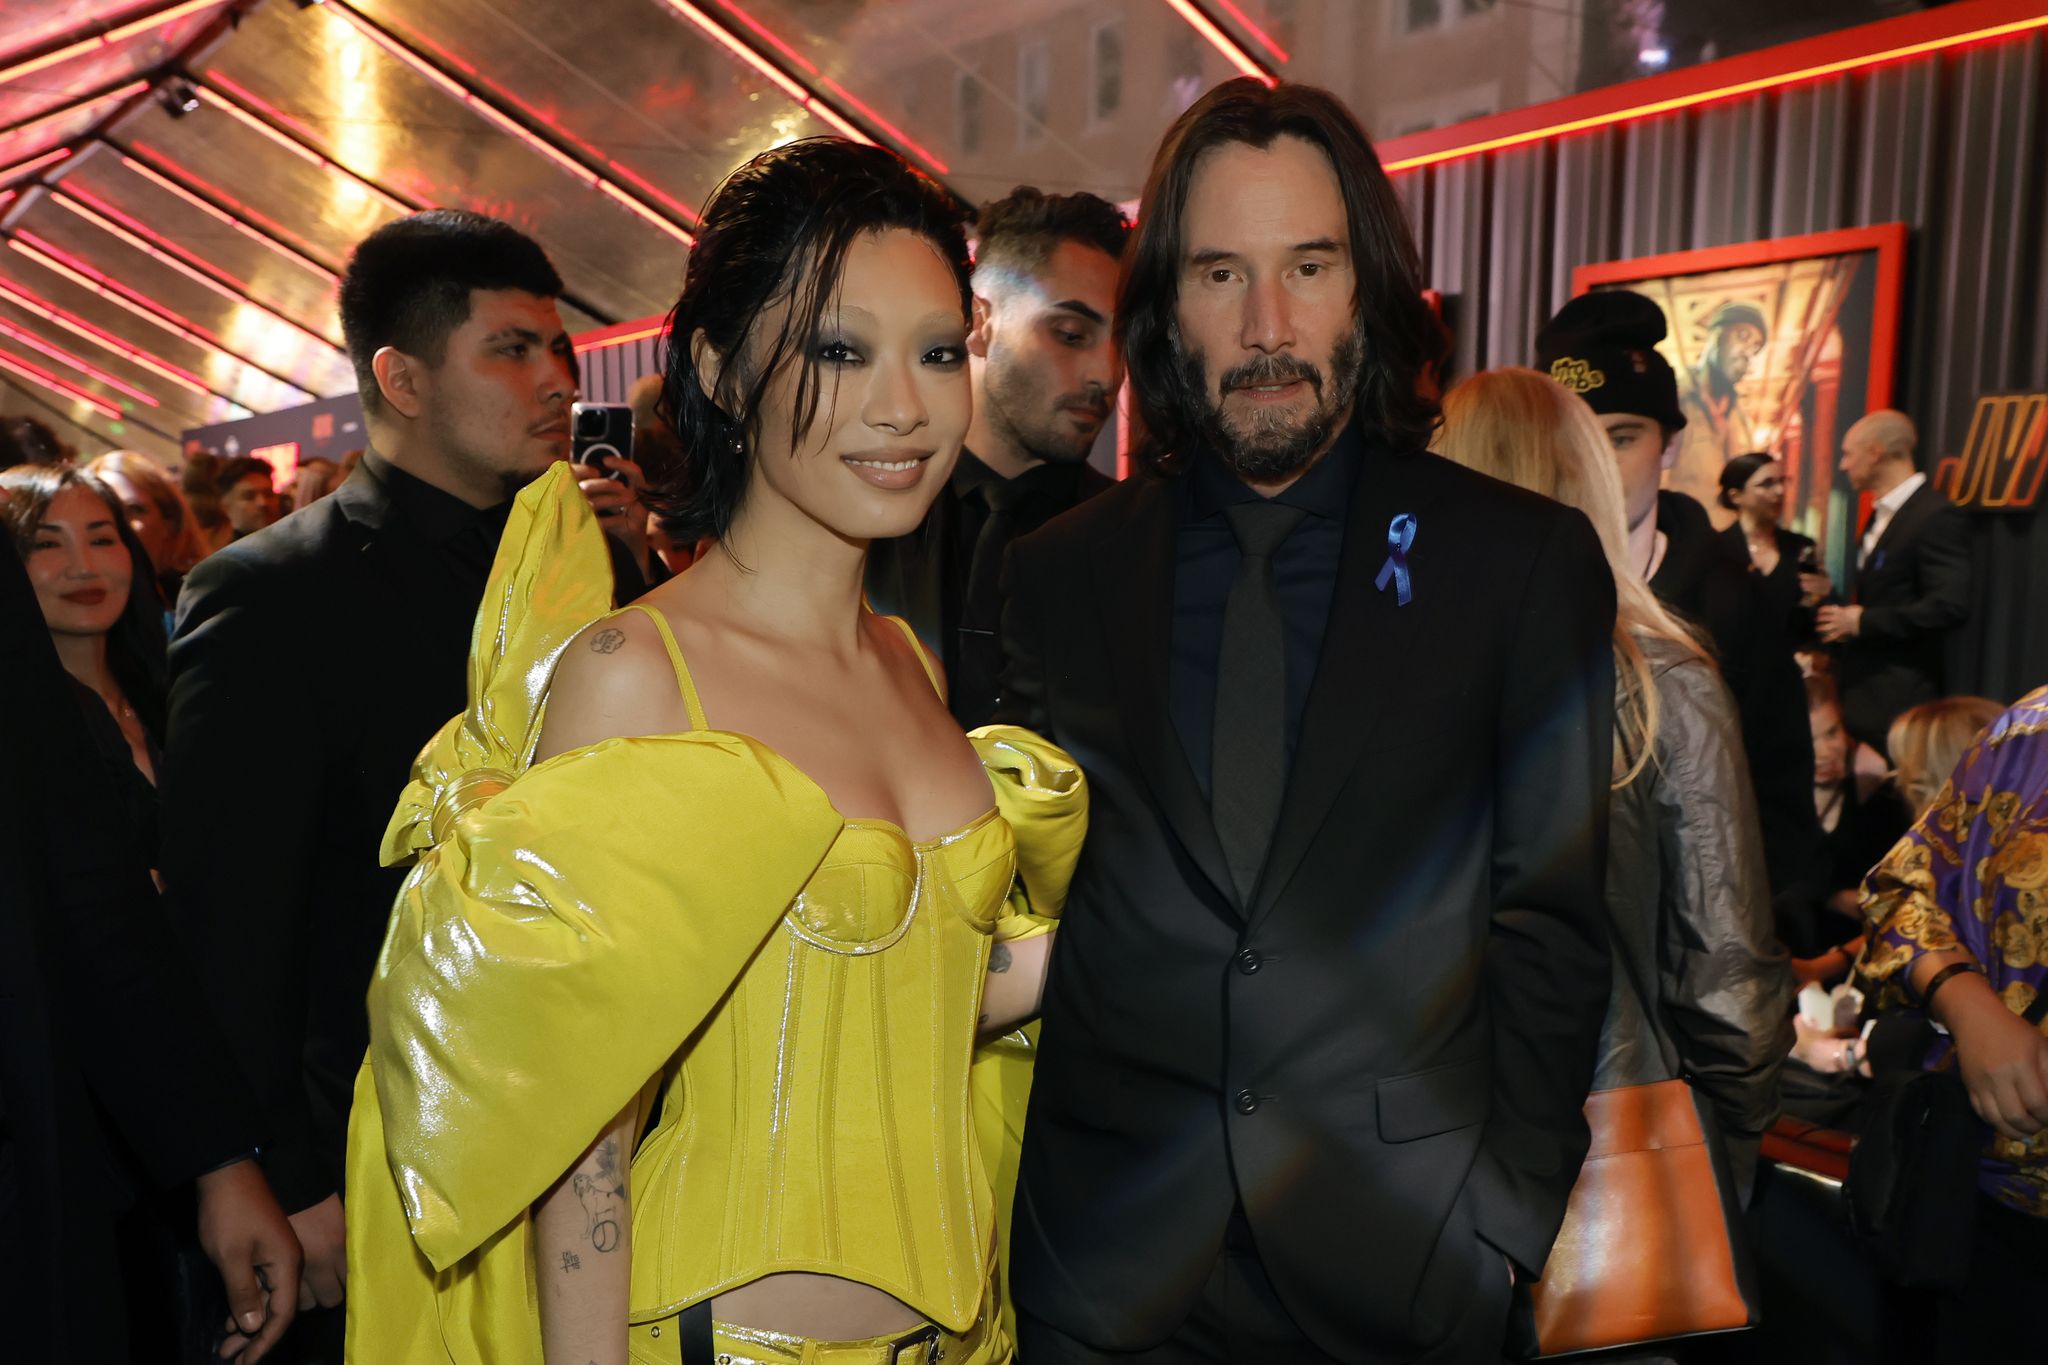 rina sawayama wearing a yellow dress, and keanu reeves wearing a black suit and tie, in a crowded movie theater